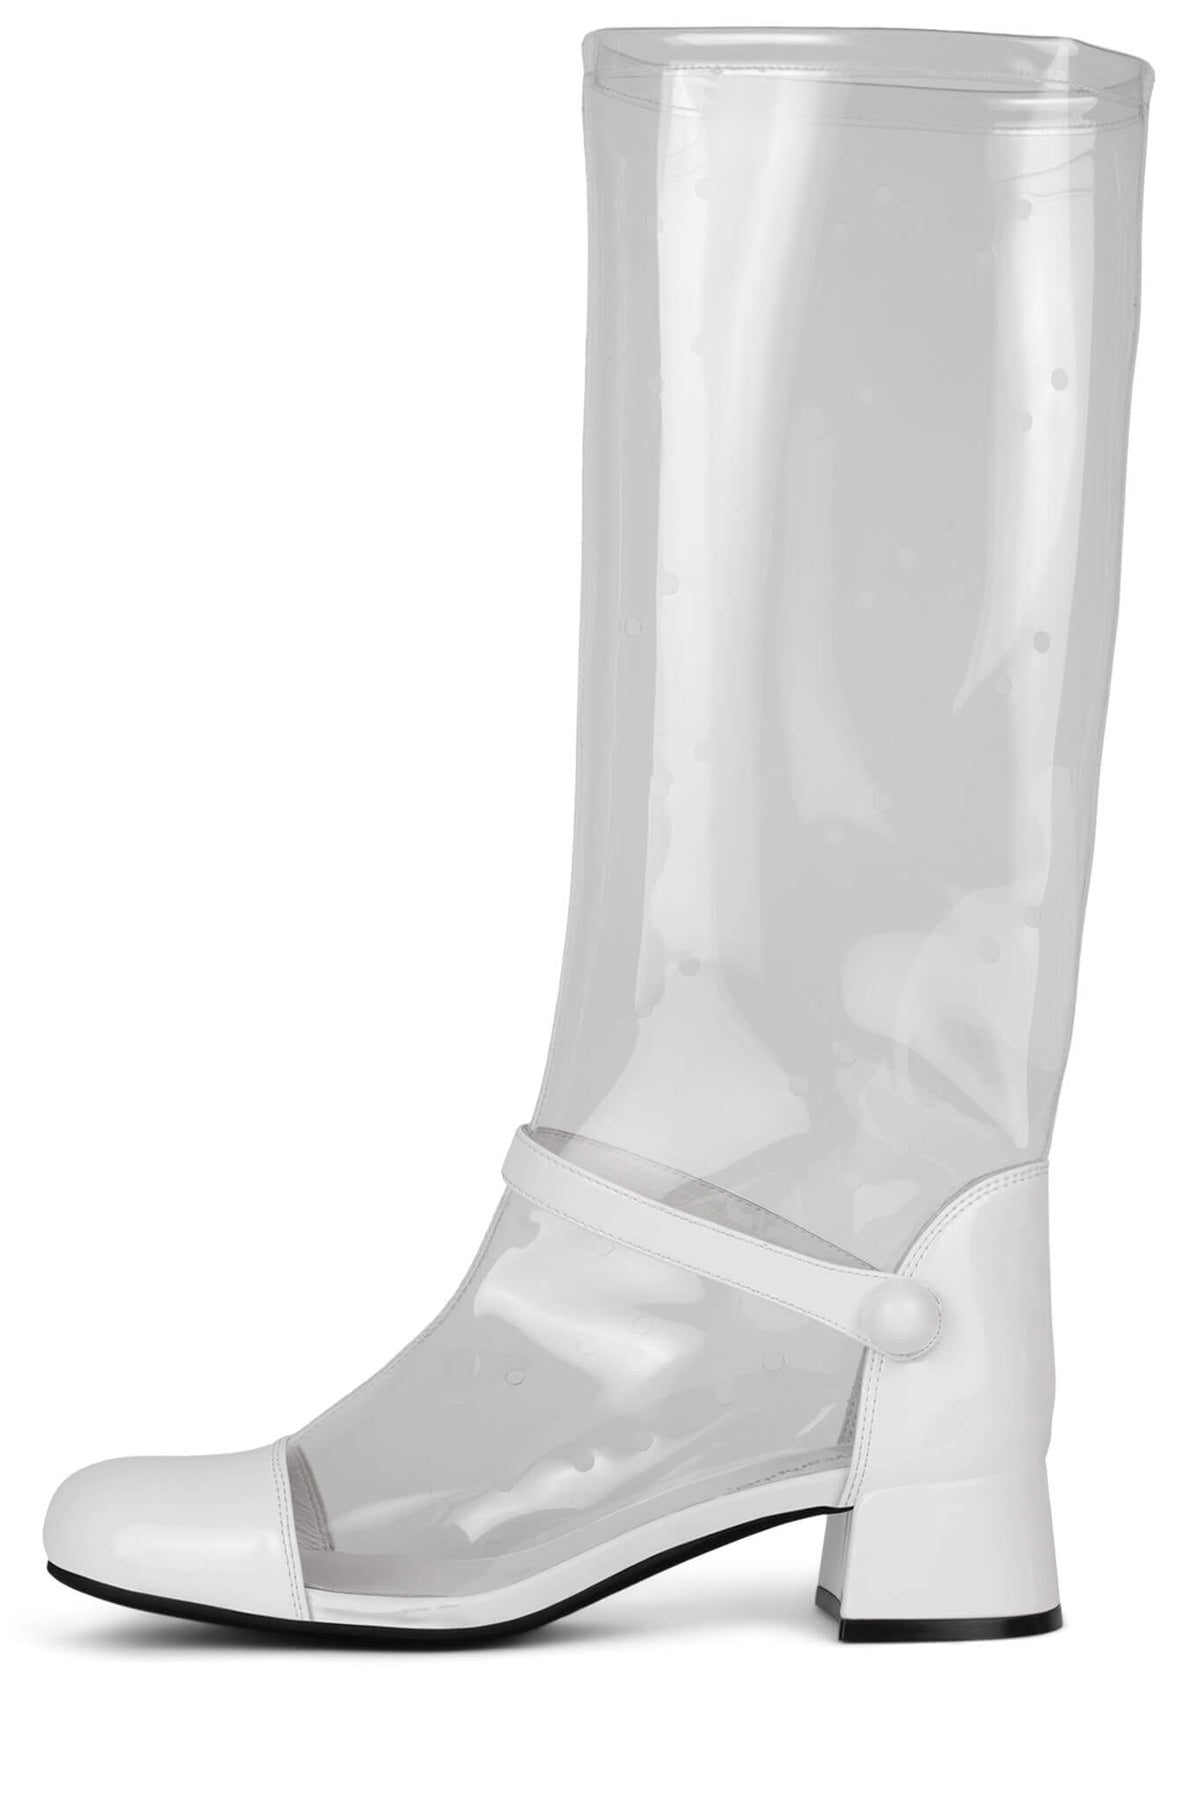 IMAGINARY Jeffrey Campbell Boots White Patent Clear Combo